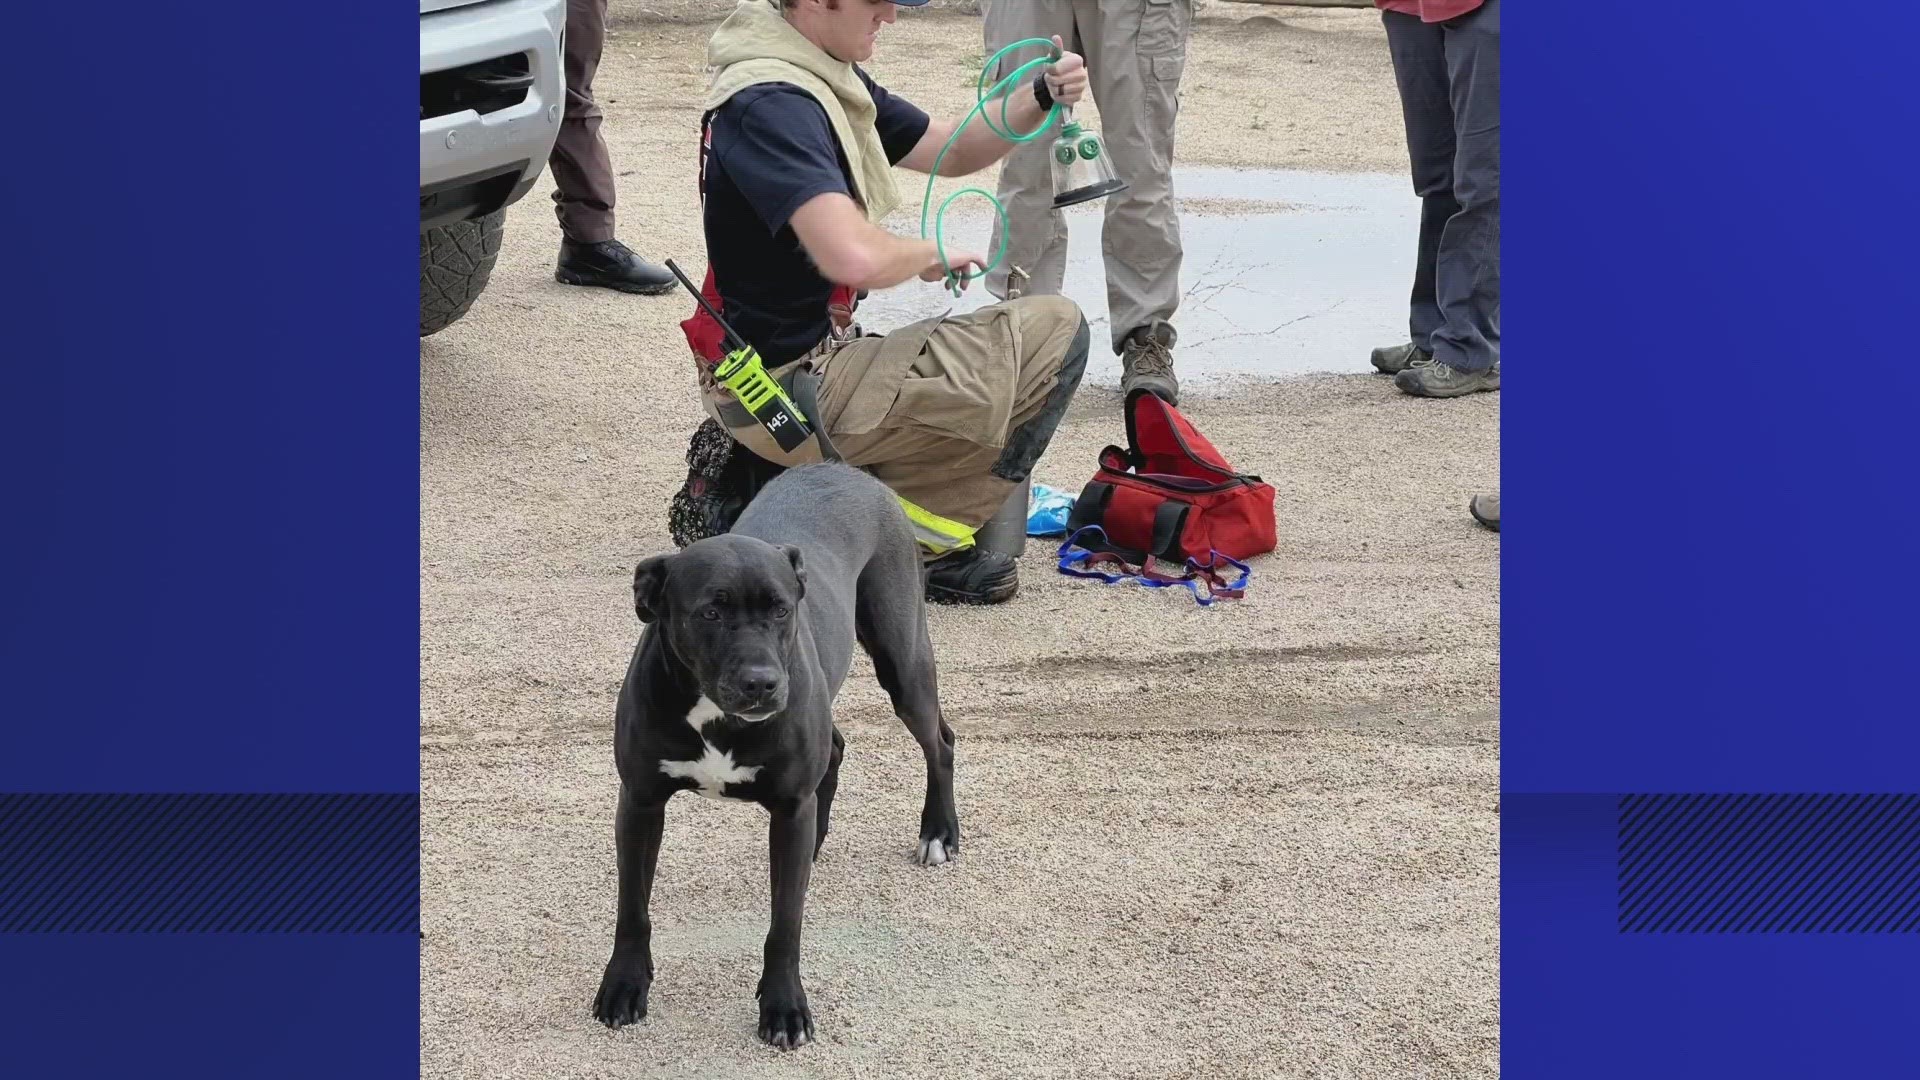 The dog was pulled from the fire unresponsive and not breathing, according to the fire department.